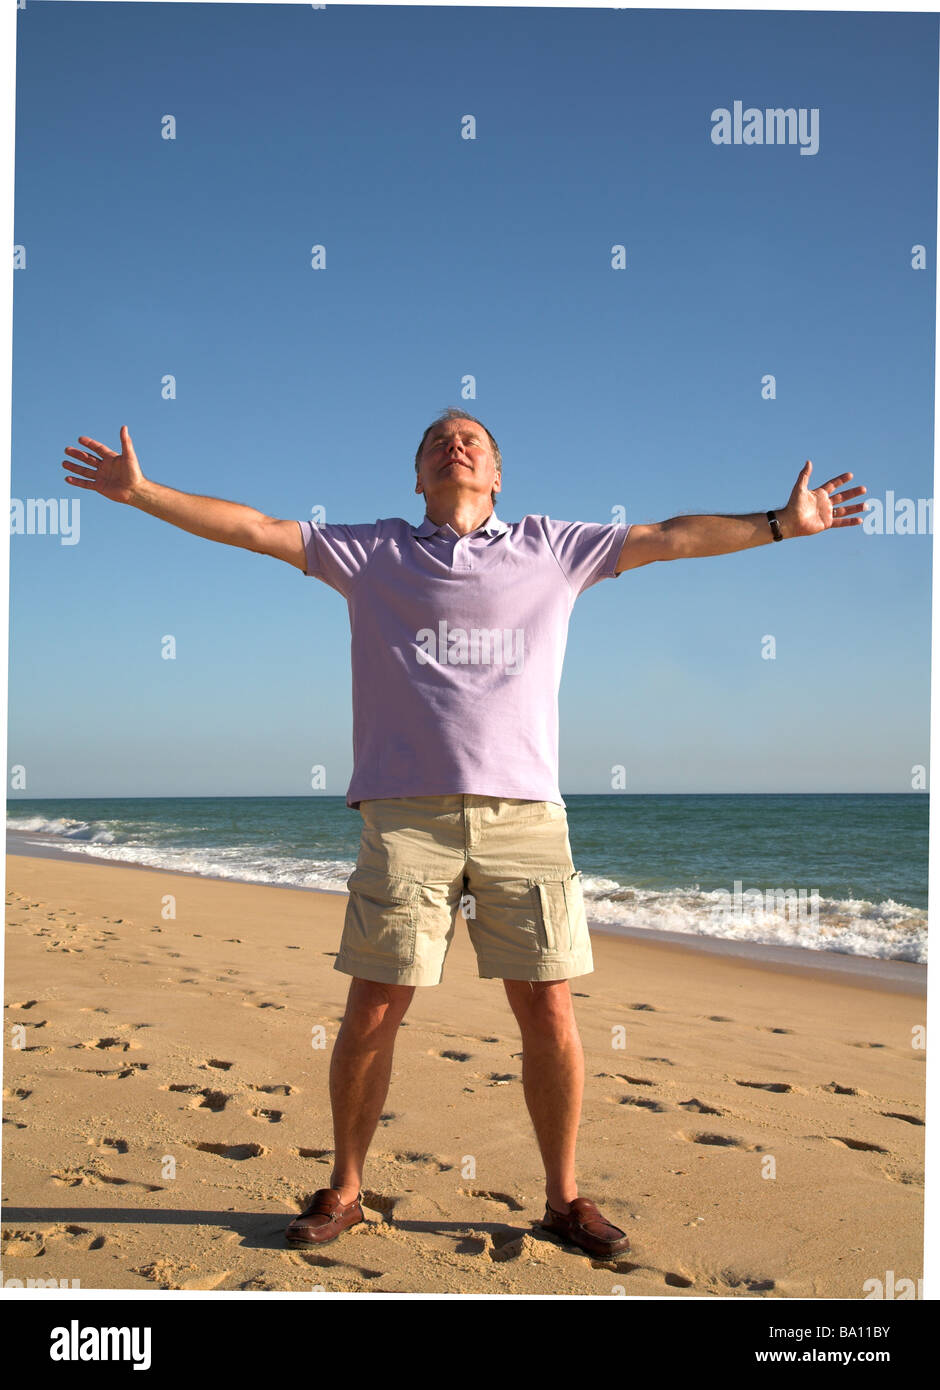 https://c8.alamy.com/comp/BA11BY/man-with-arms-stretched-out-on-beach-BA11BY.jpg